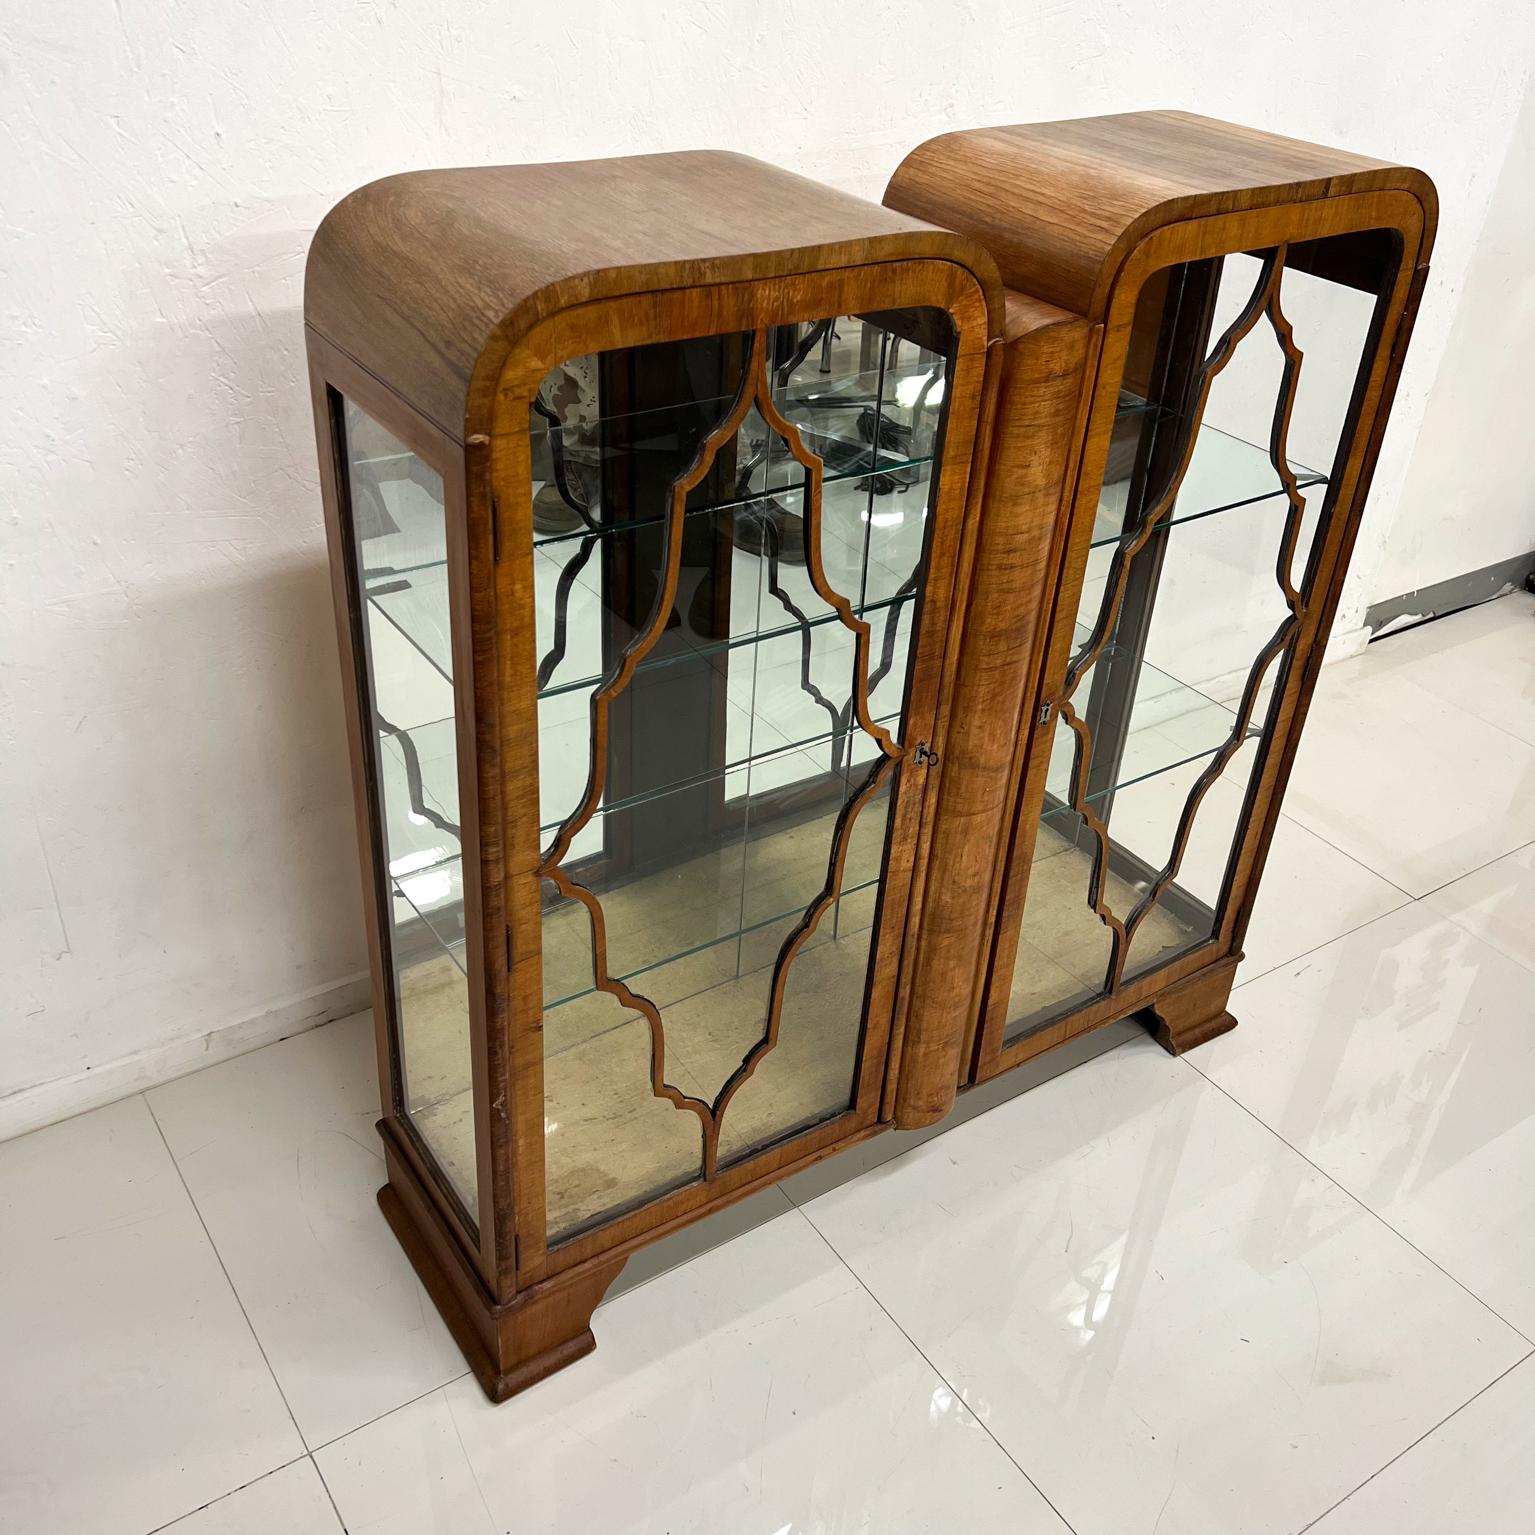 1930s Art Deco Display cabinet exotic wood vitrine with bent plywood.
Two doors with original glass panels lead back frame.
Sculptural wood details at front.
Two glass shelves, original key present and in working condition.
Measures: 45.5 tall x